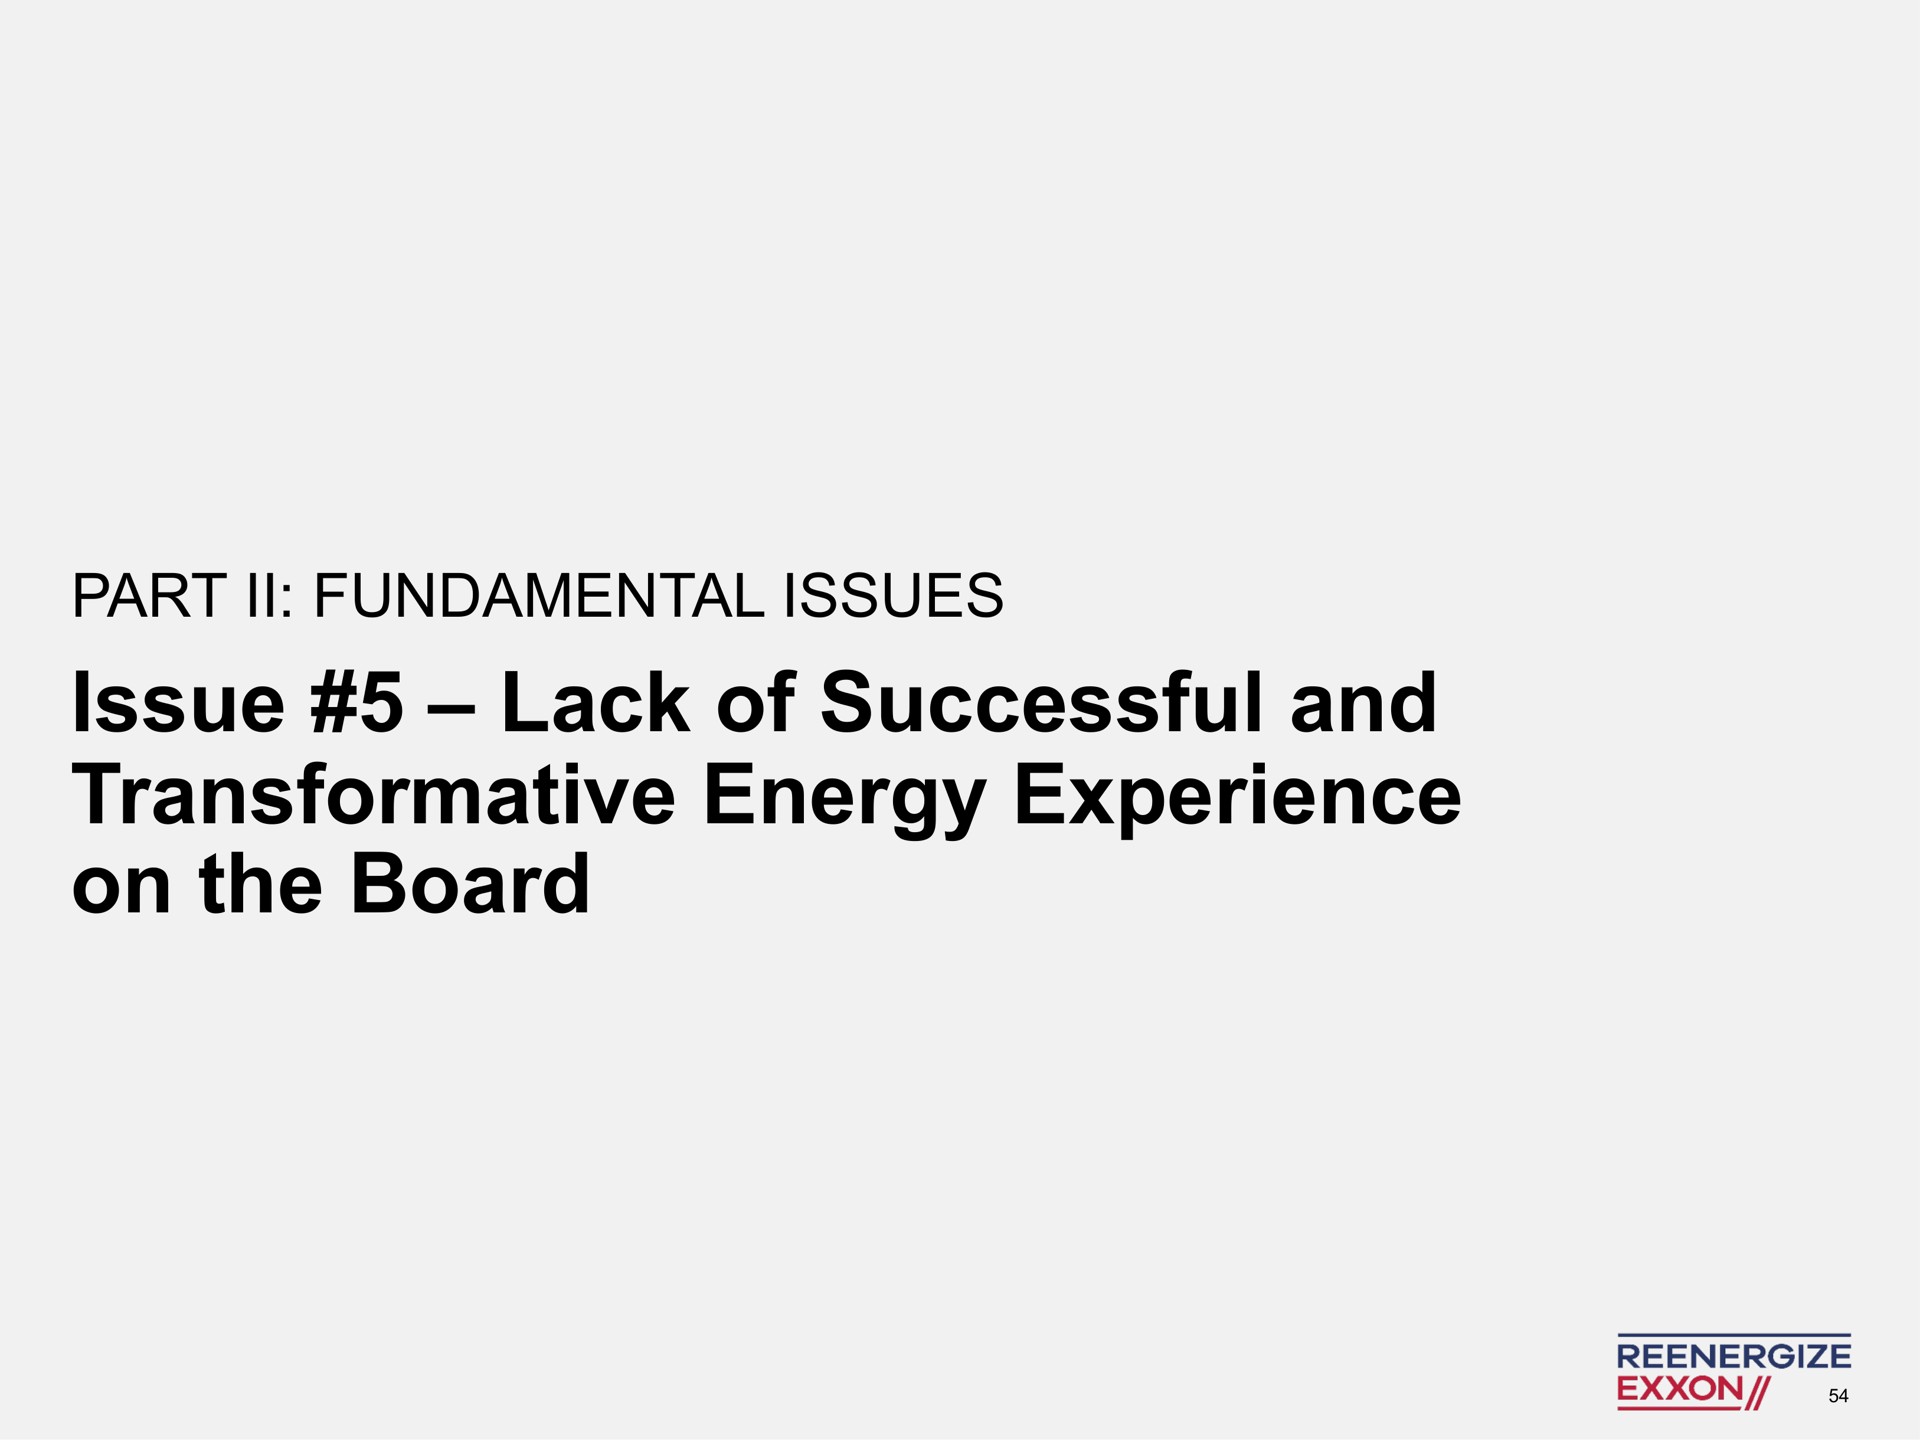 part fundamental issues issue lack of successful and transformative energy experience on the board | Engine No. 1